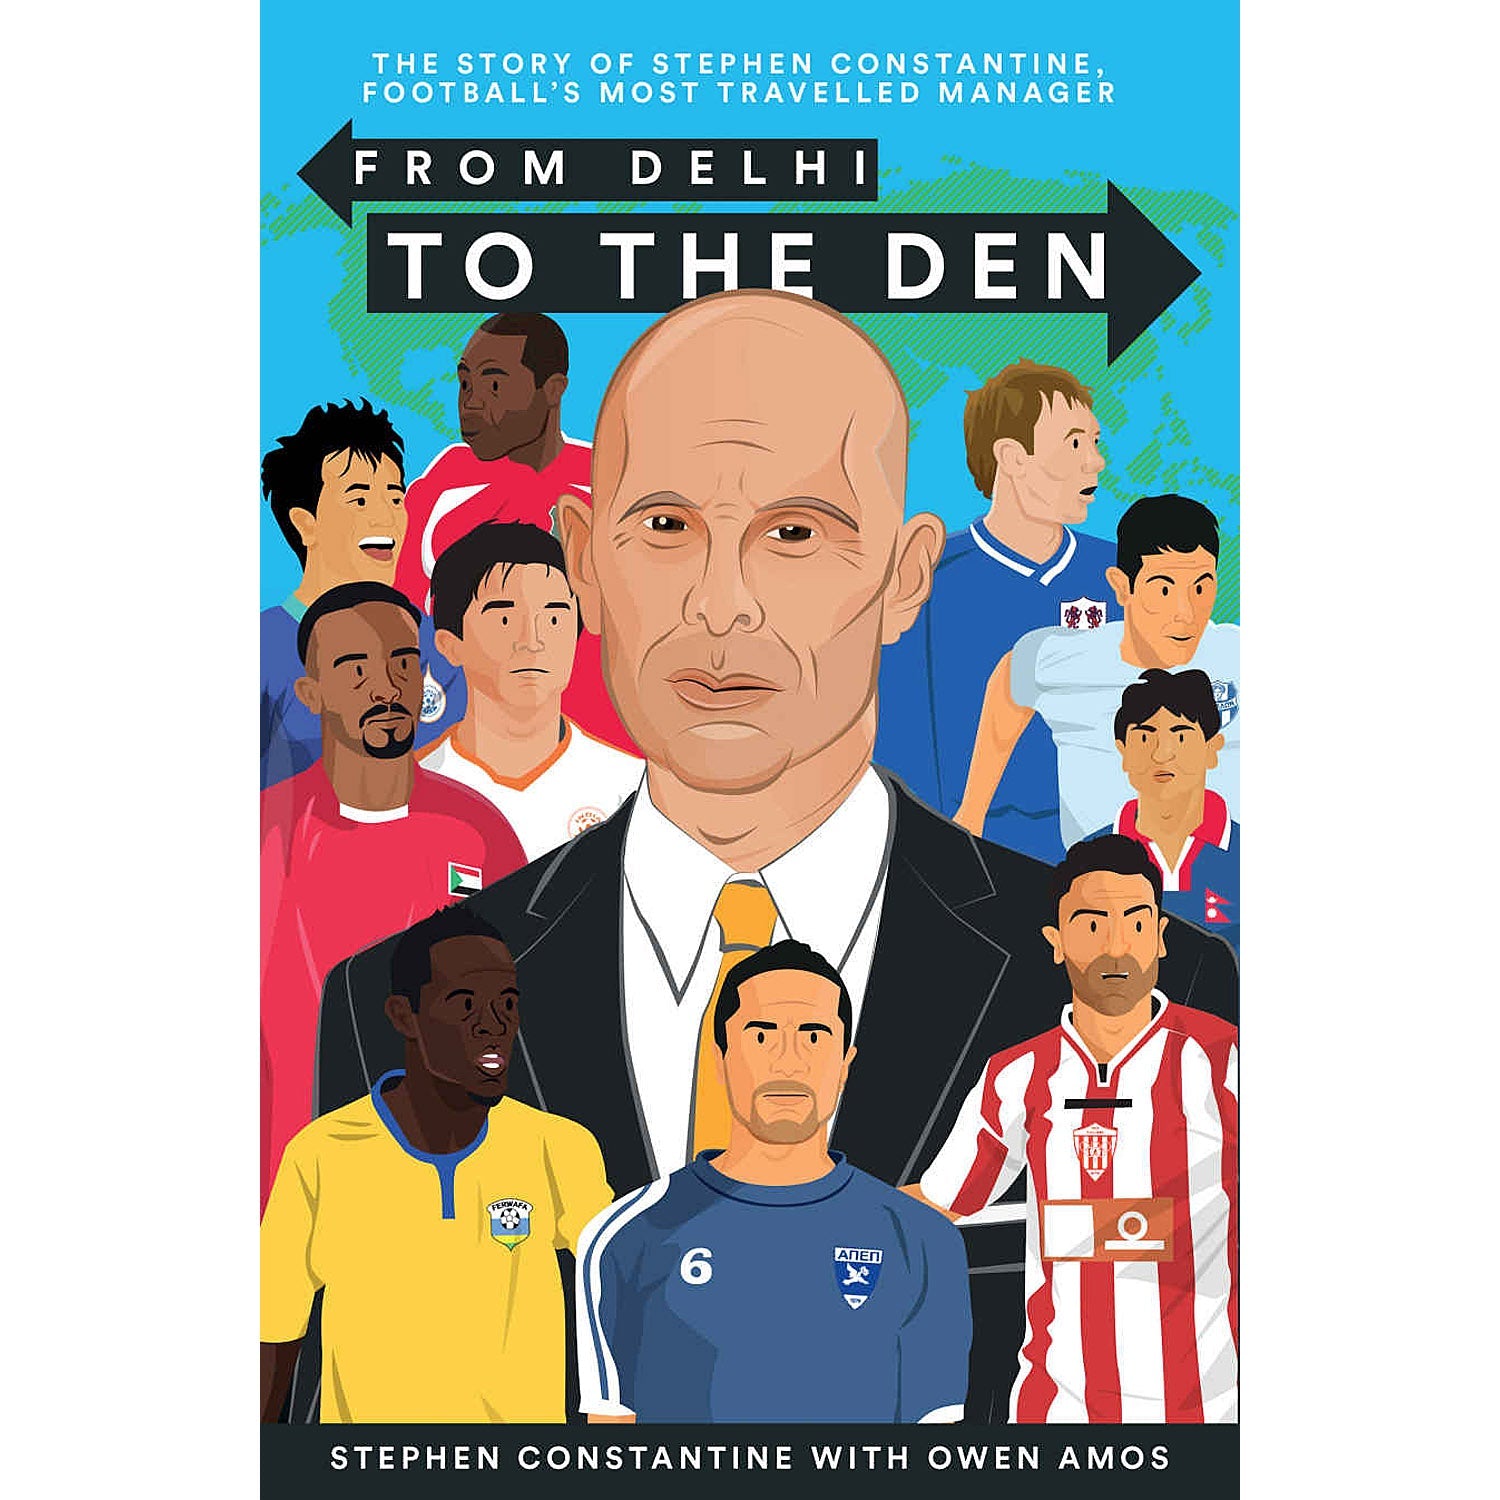 From Delhi to The Den – The Story of Stephen Constantine, Football's Most Travelled Manager